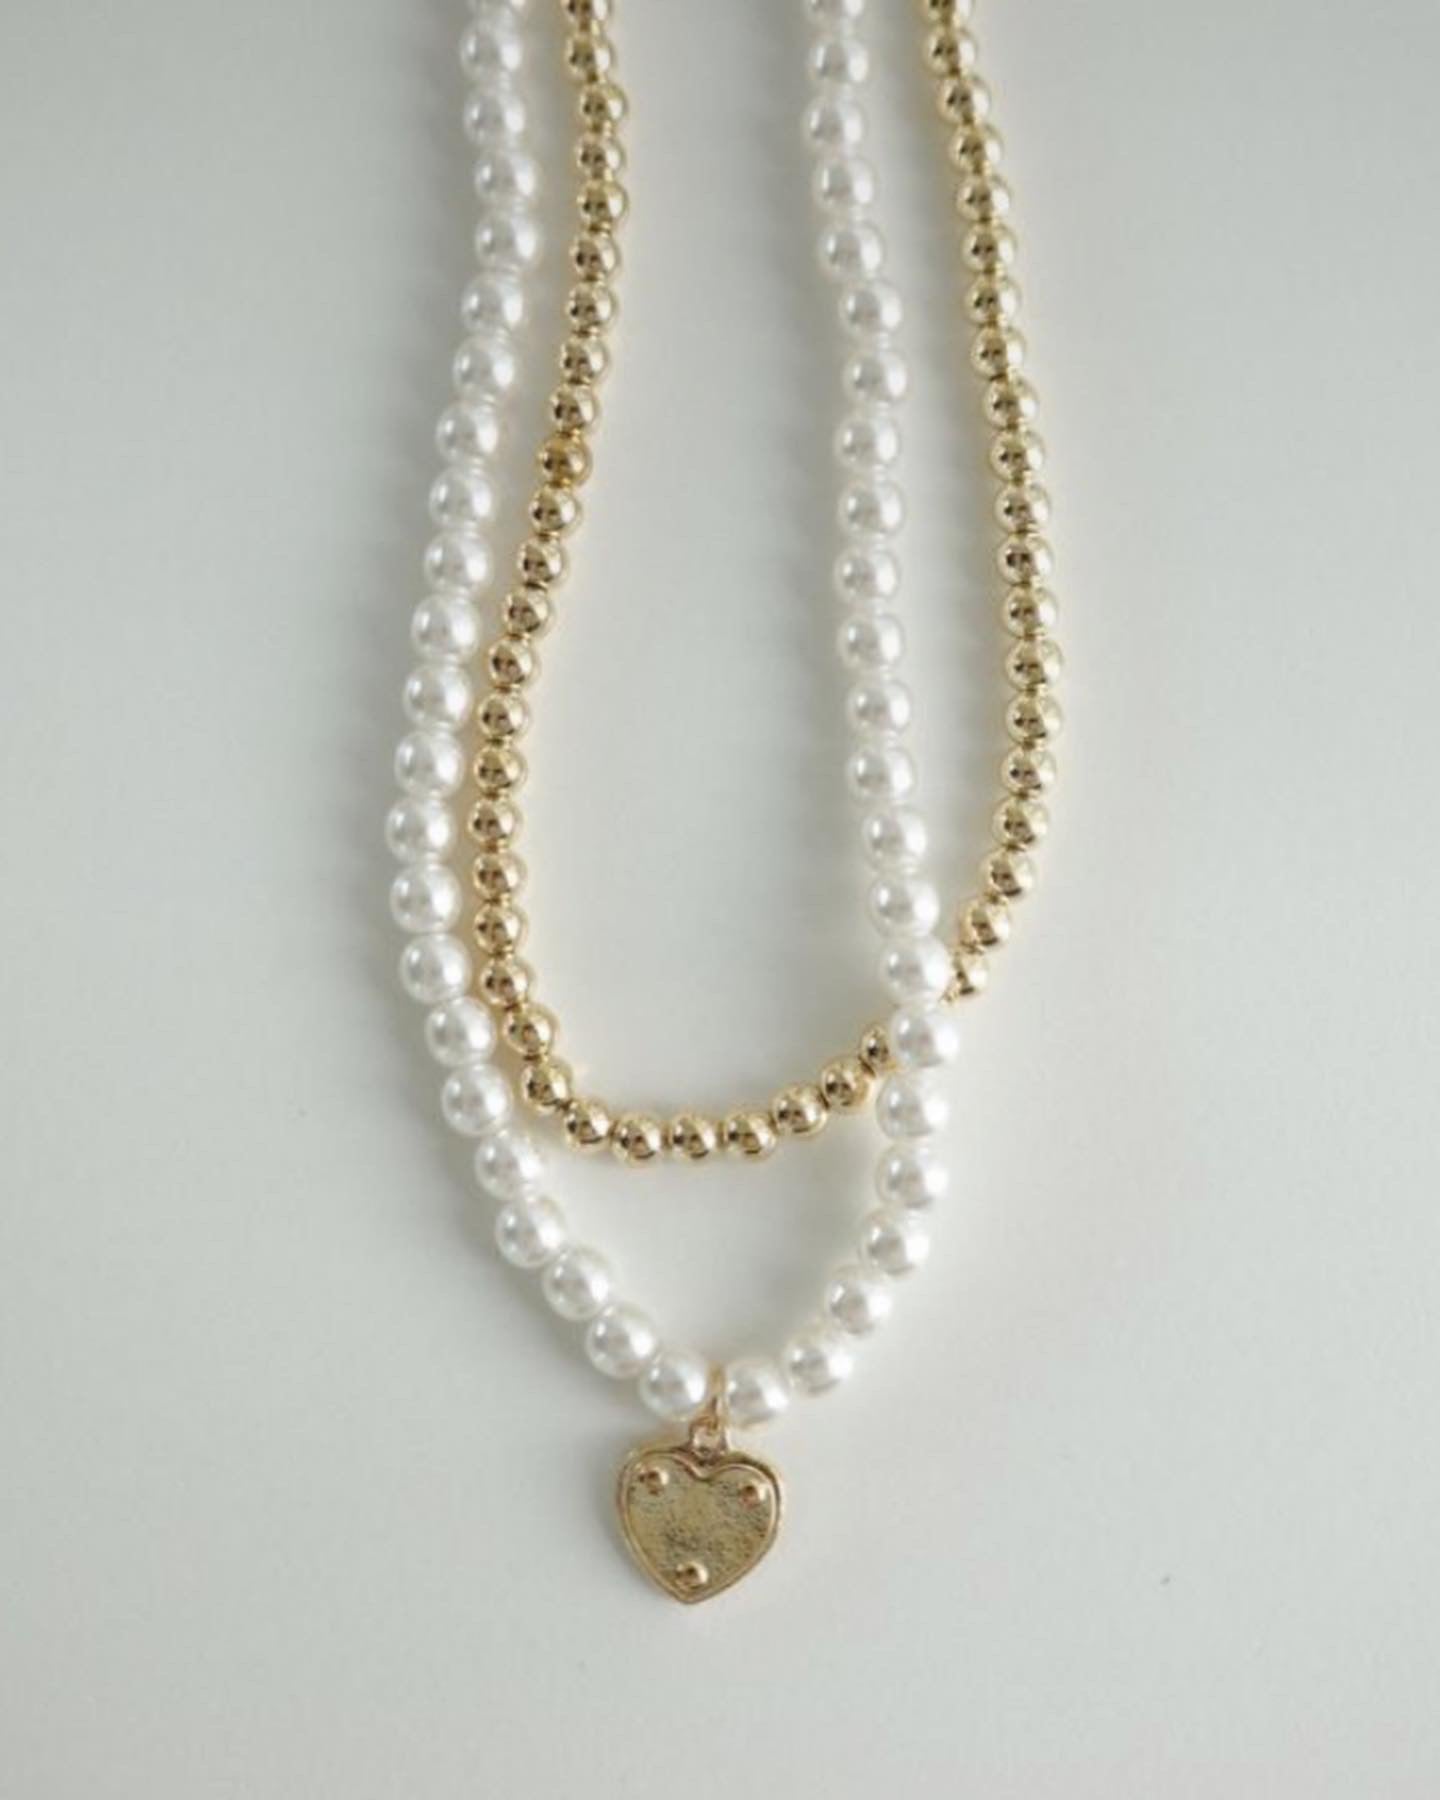 Pearl Beads Necklace Set